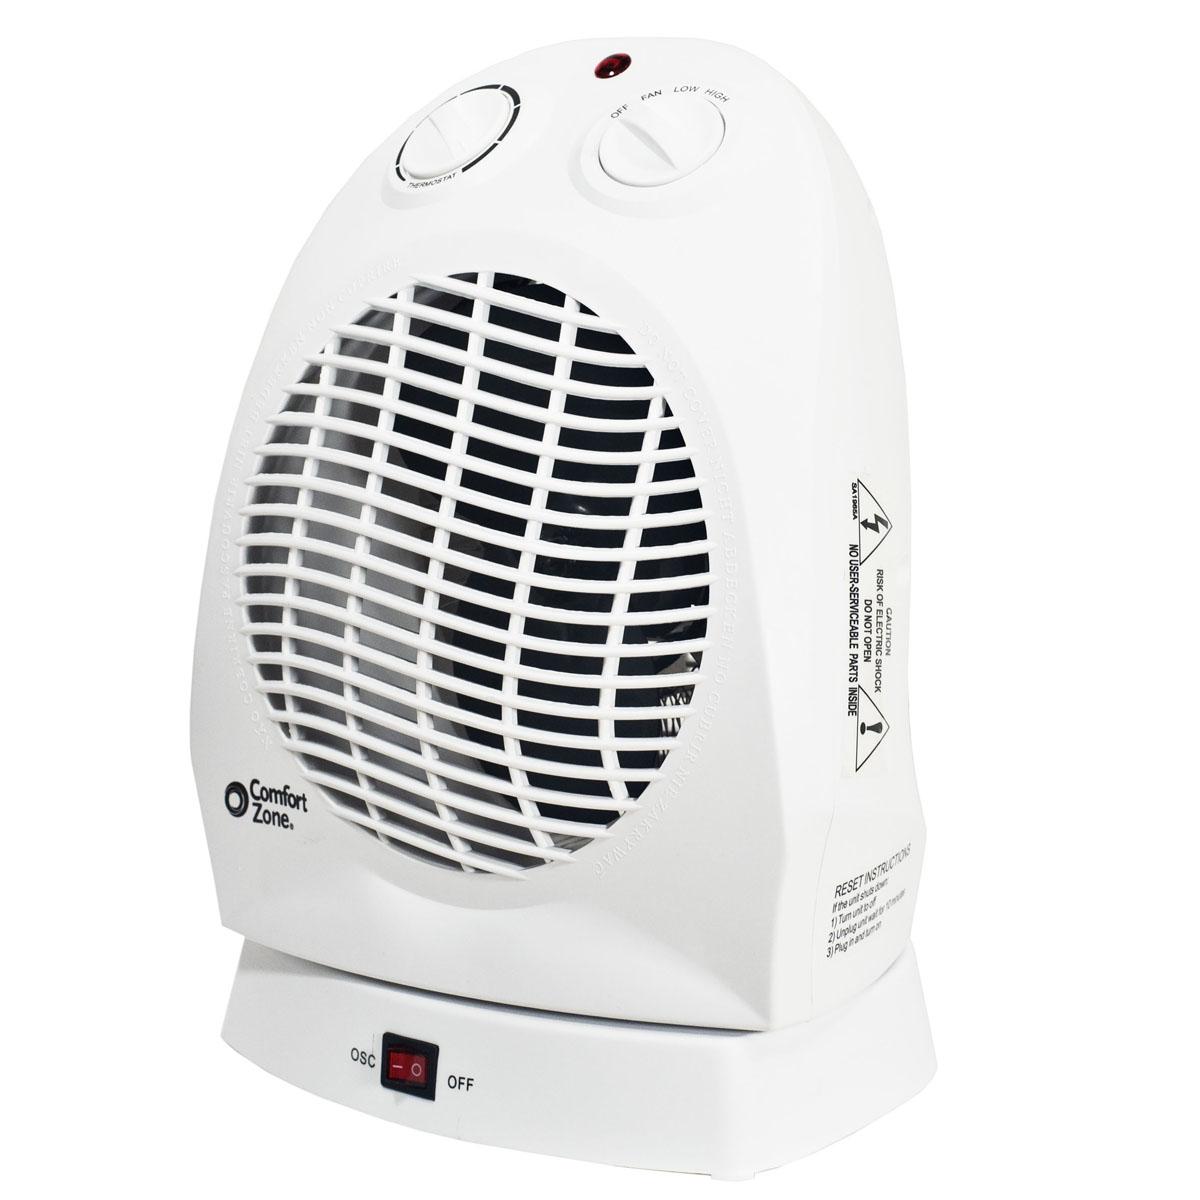 Comfort Zone CZ50 Oscillating Electric Portable Heater with Thermostat for $11.83